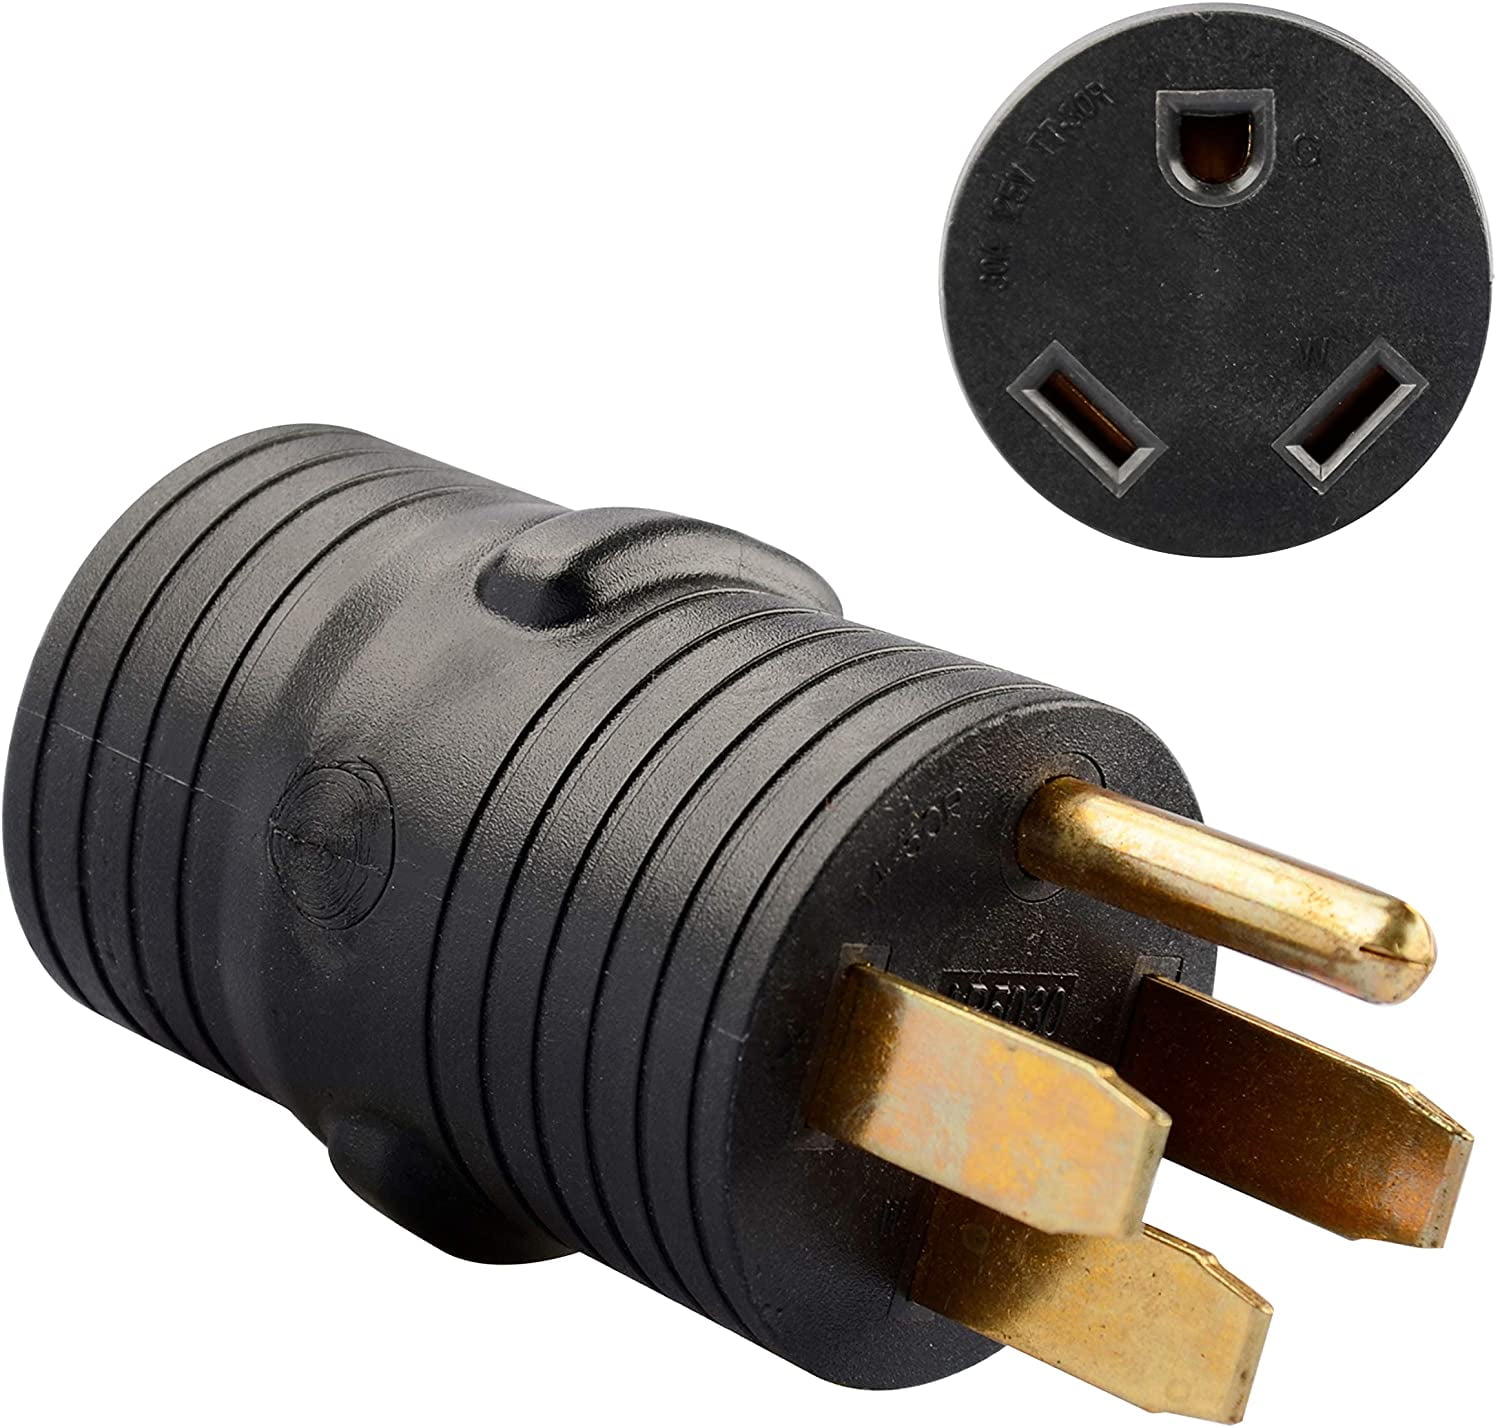 travel trailer 30 to 50 amp adapter